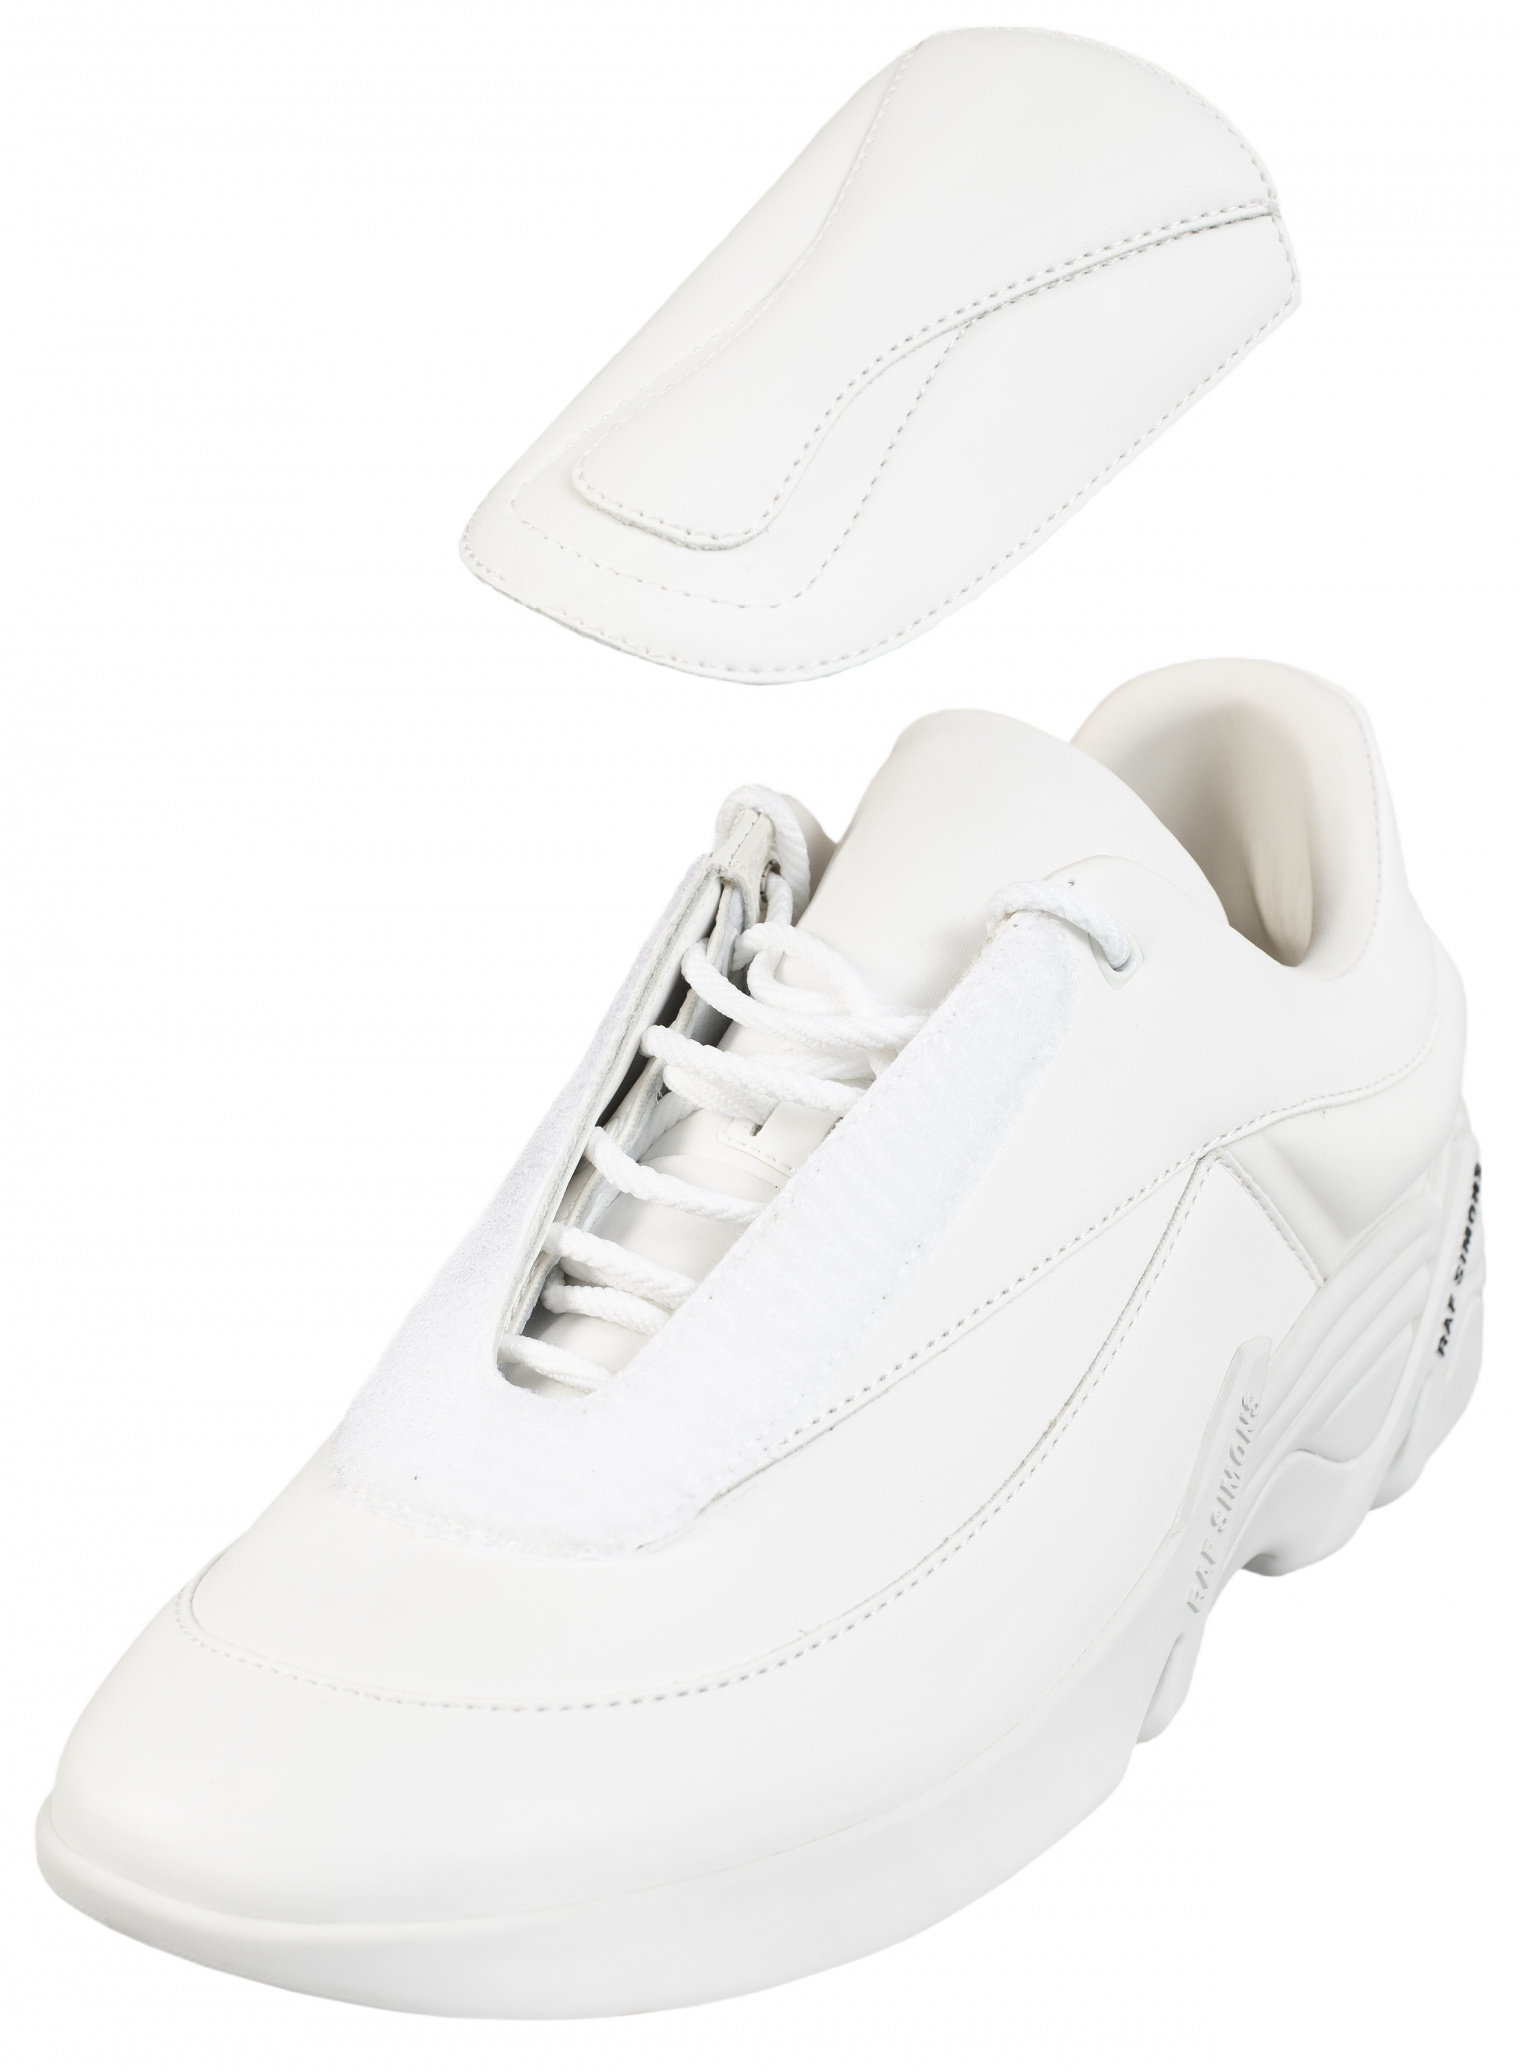 Raf Simons Leather Antei Sneakers in white